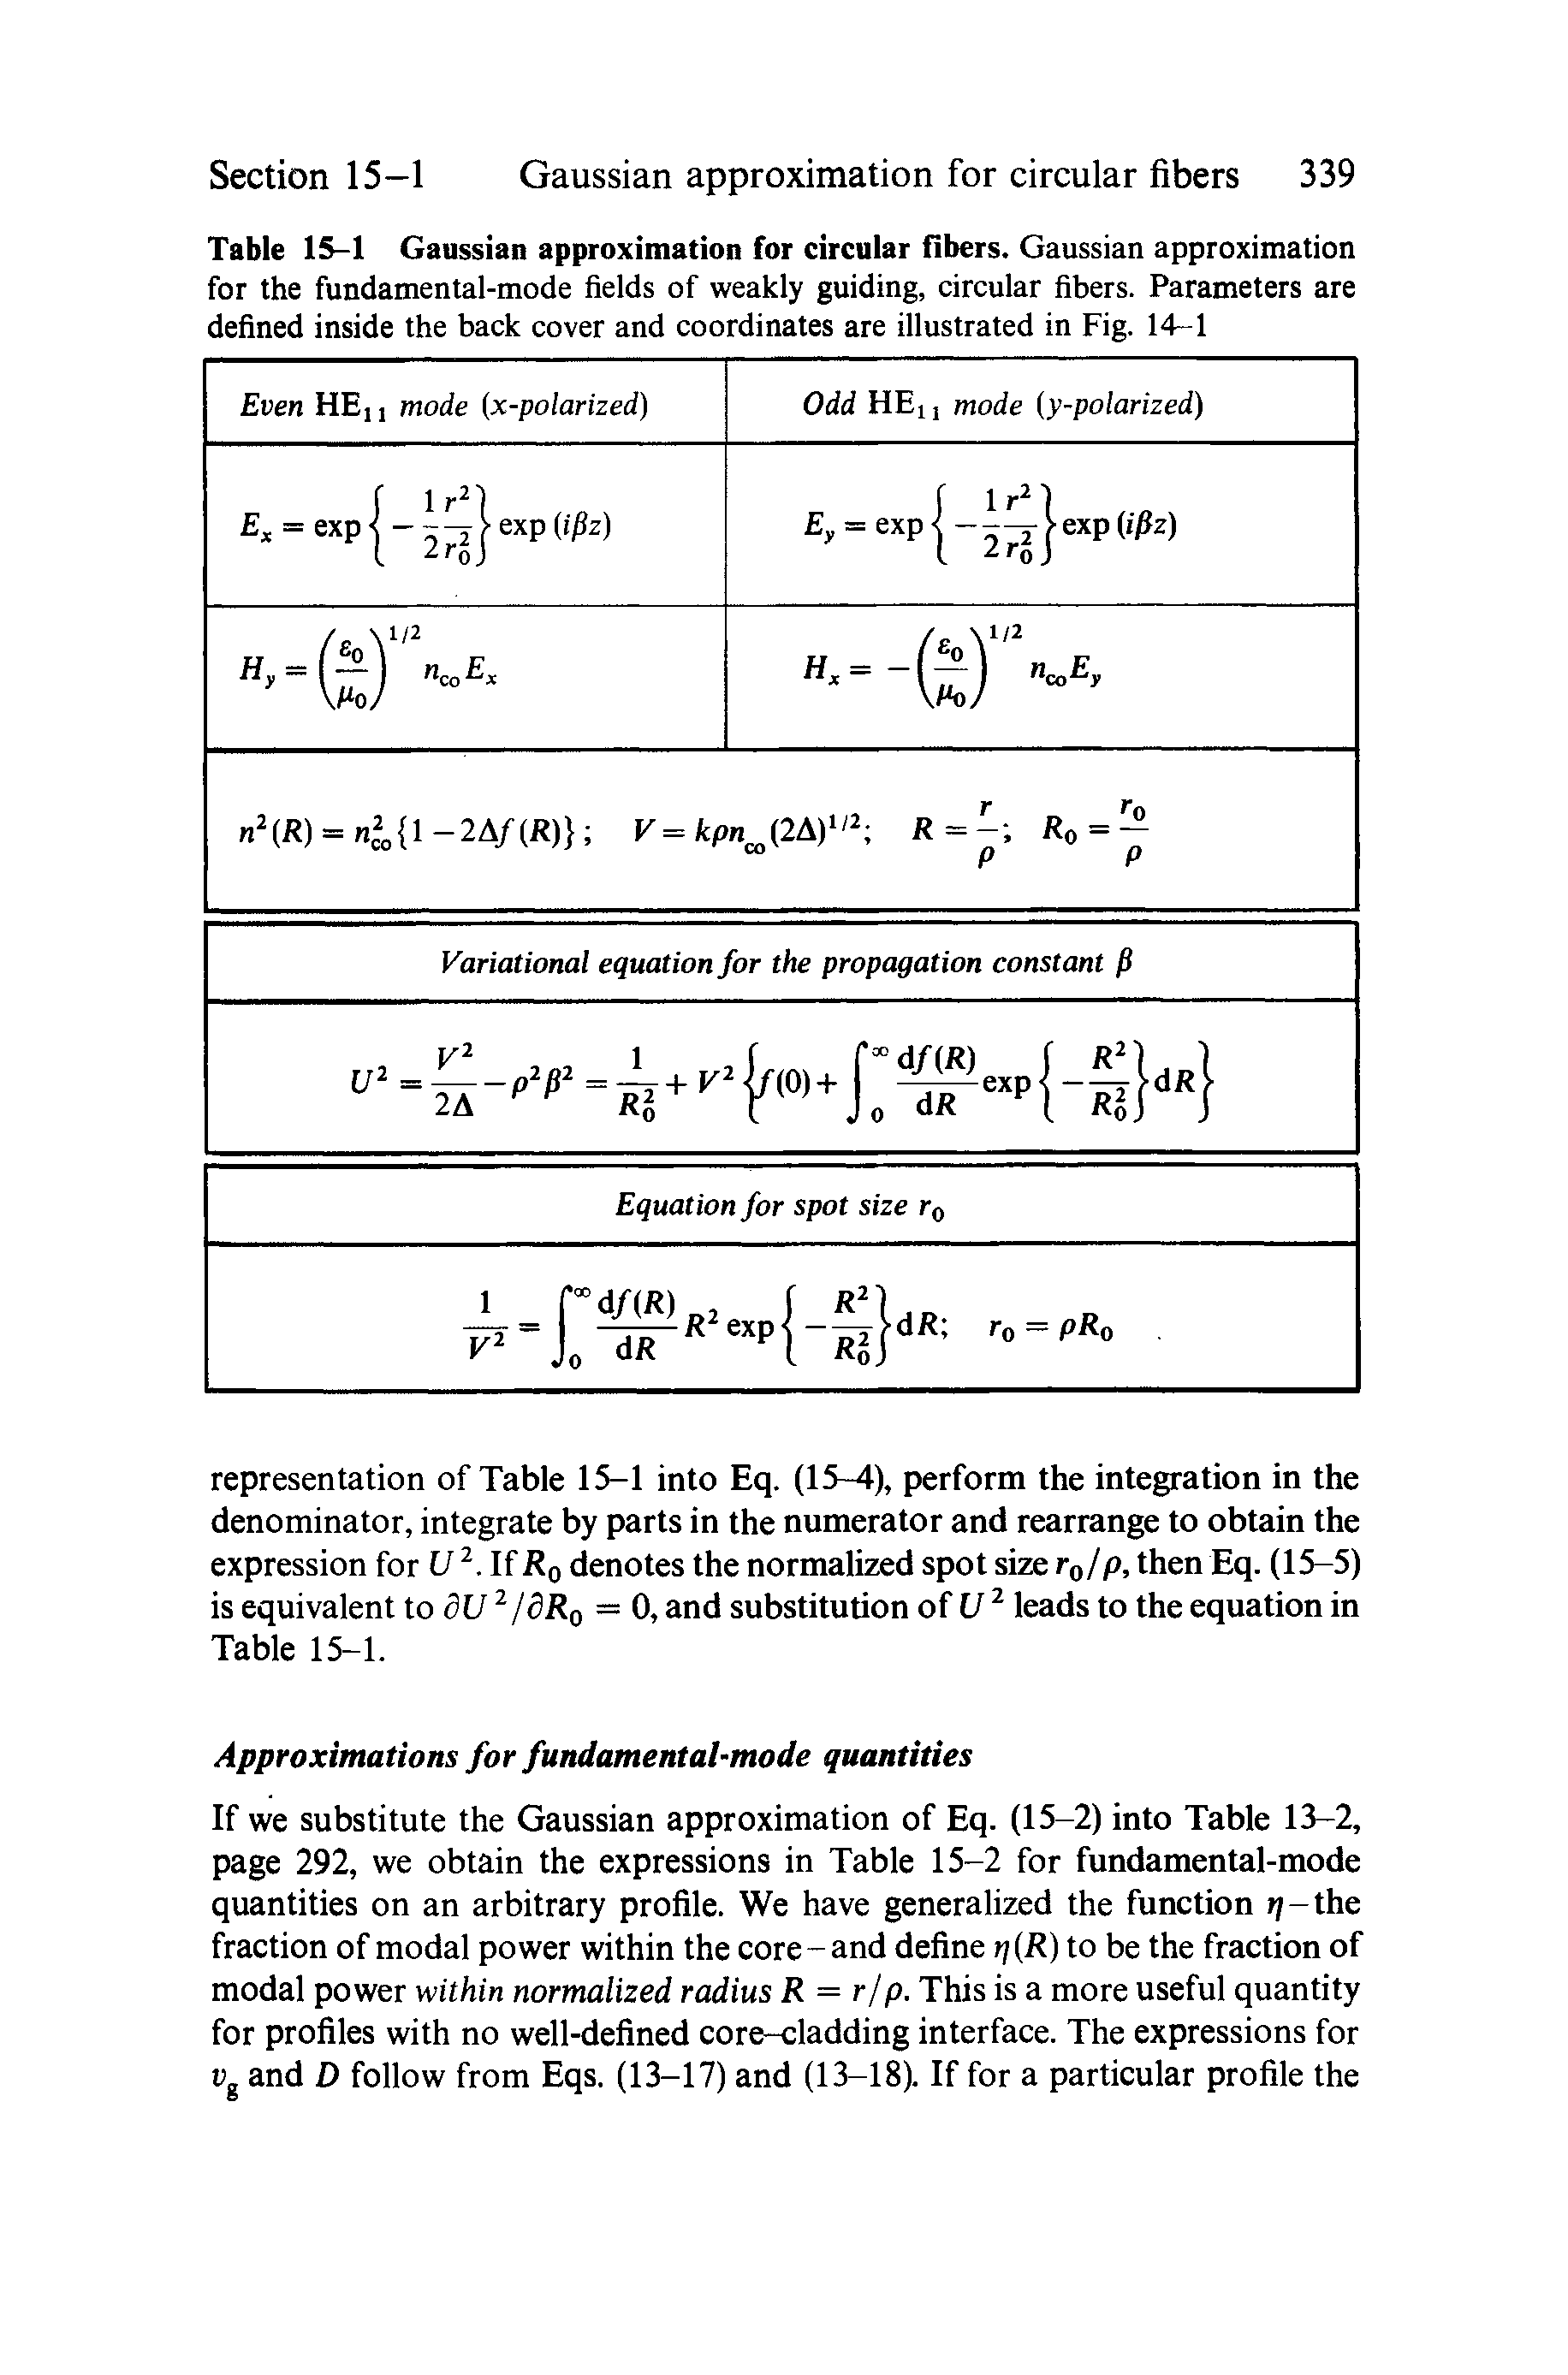 Table 15-1 Gaussian approximation for circular fibers. Gaussian approximation for the fundamental-mode fields of weakly guiding, circular fibers. Parameters are defined inside the back cover and coordinates are illustrated in Fig. 14-1...